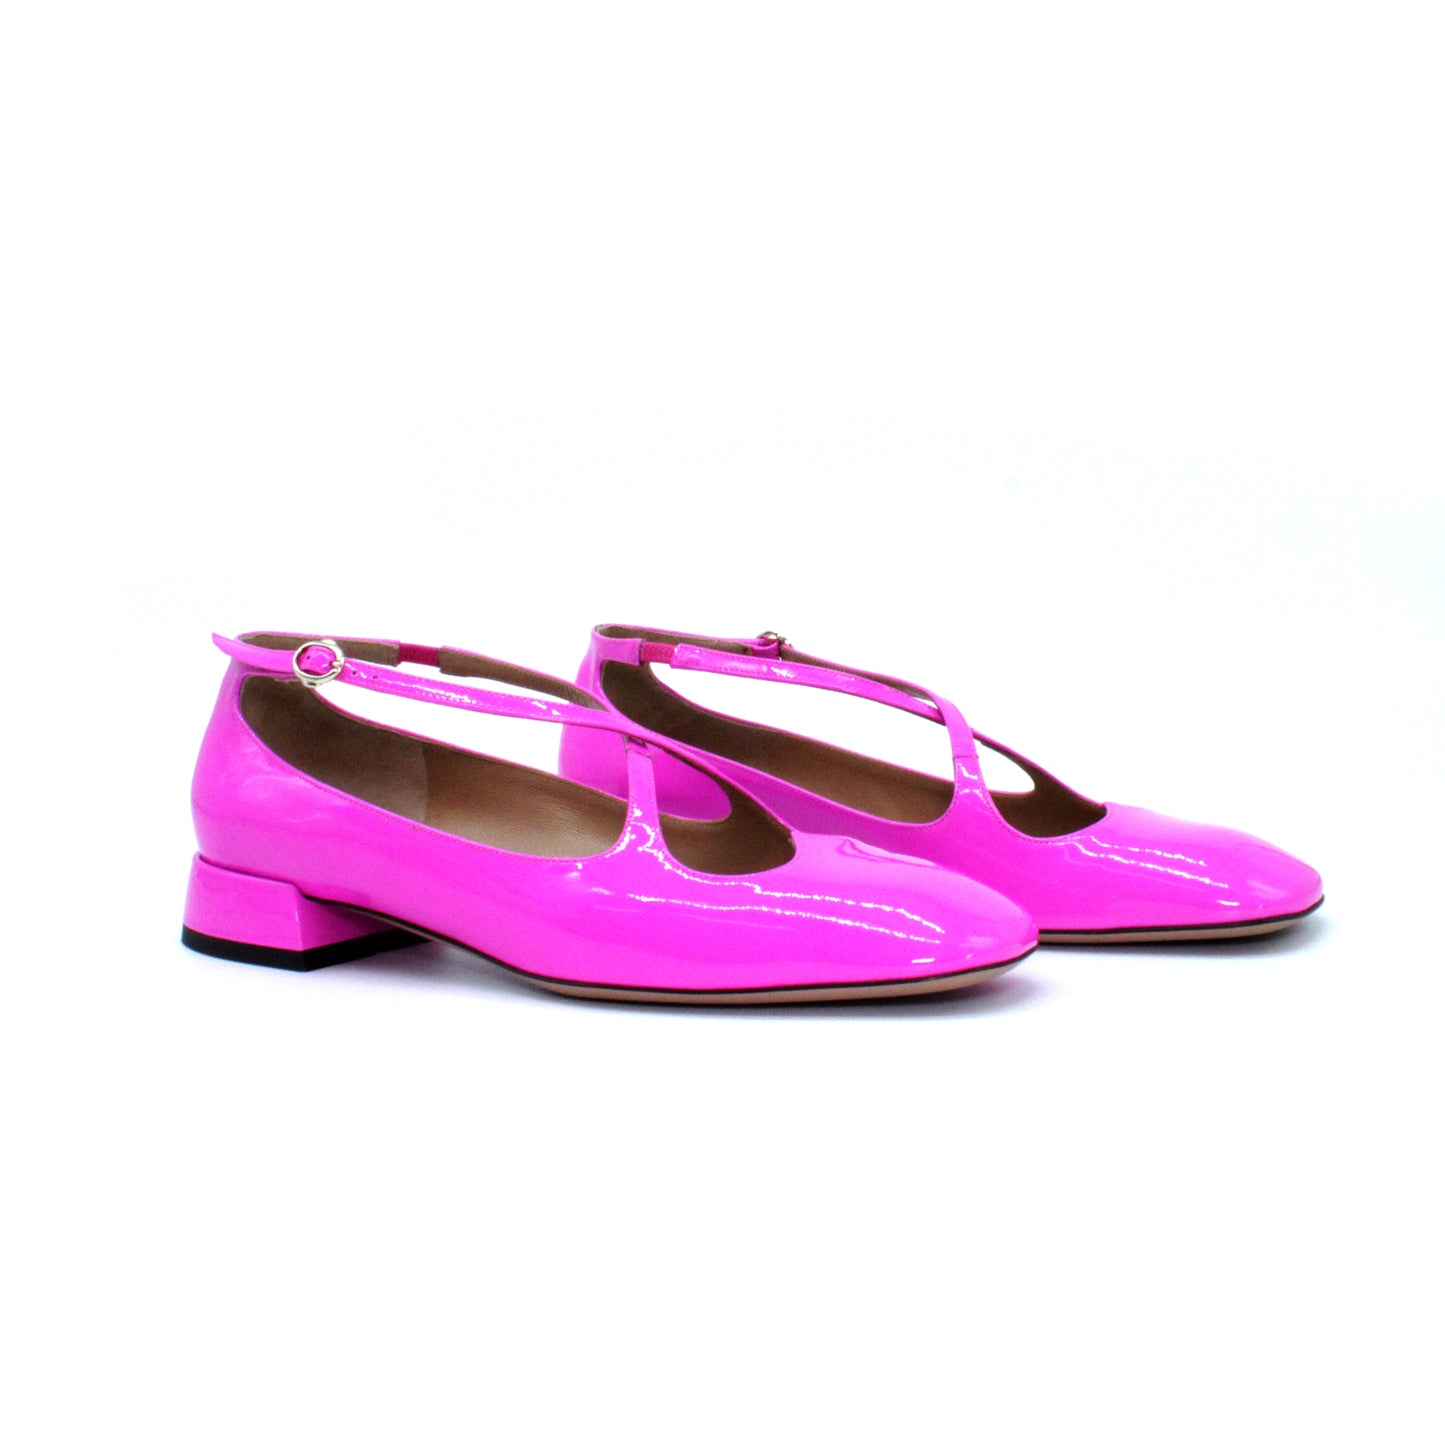 Pump Two for Love in fuchsia patent leather